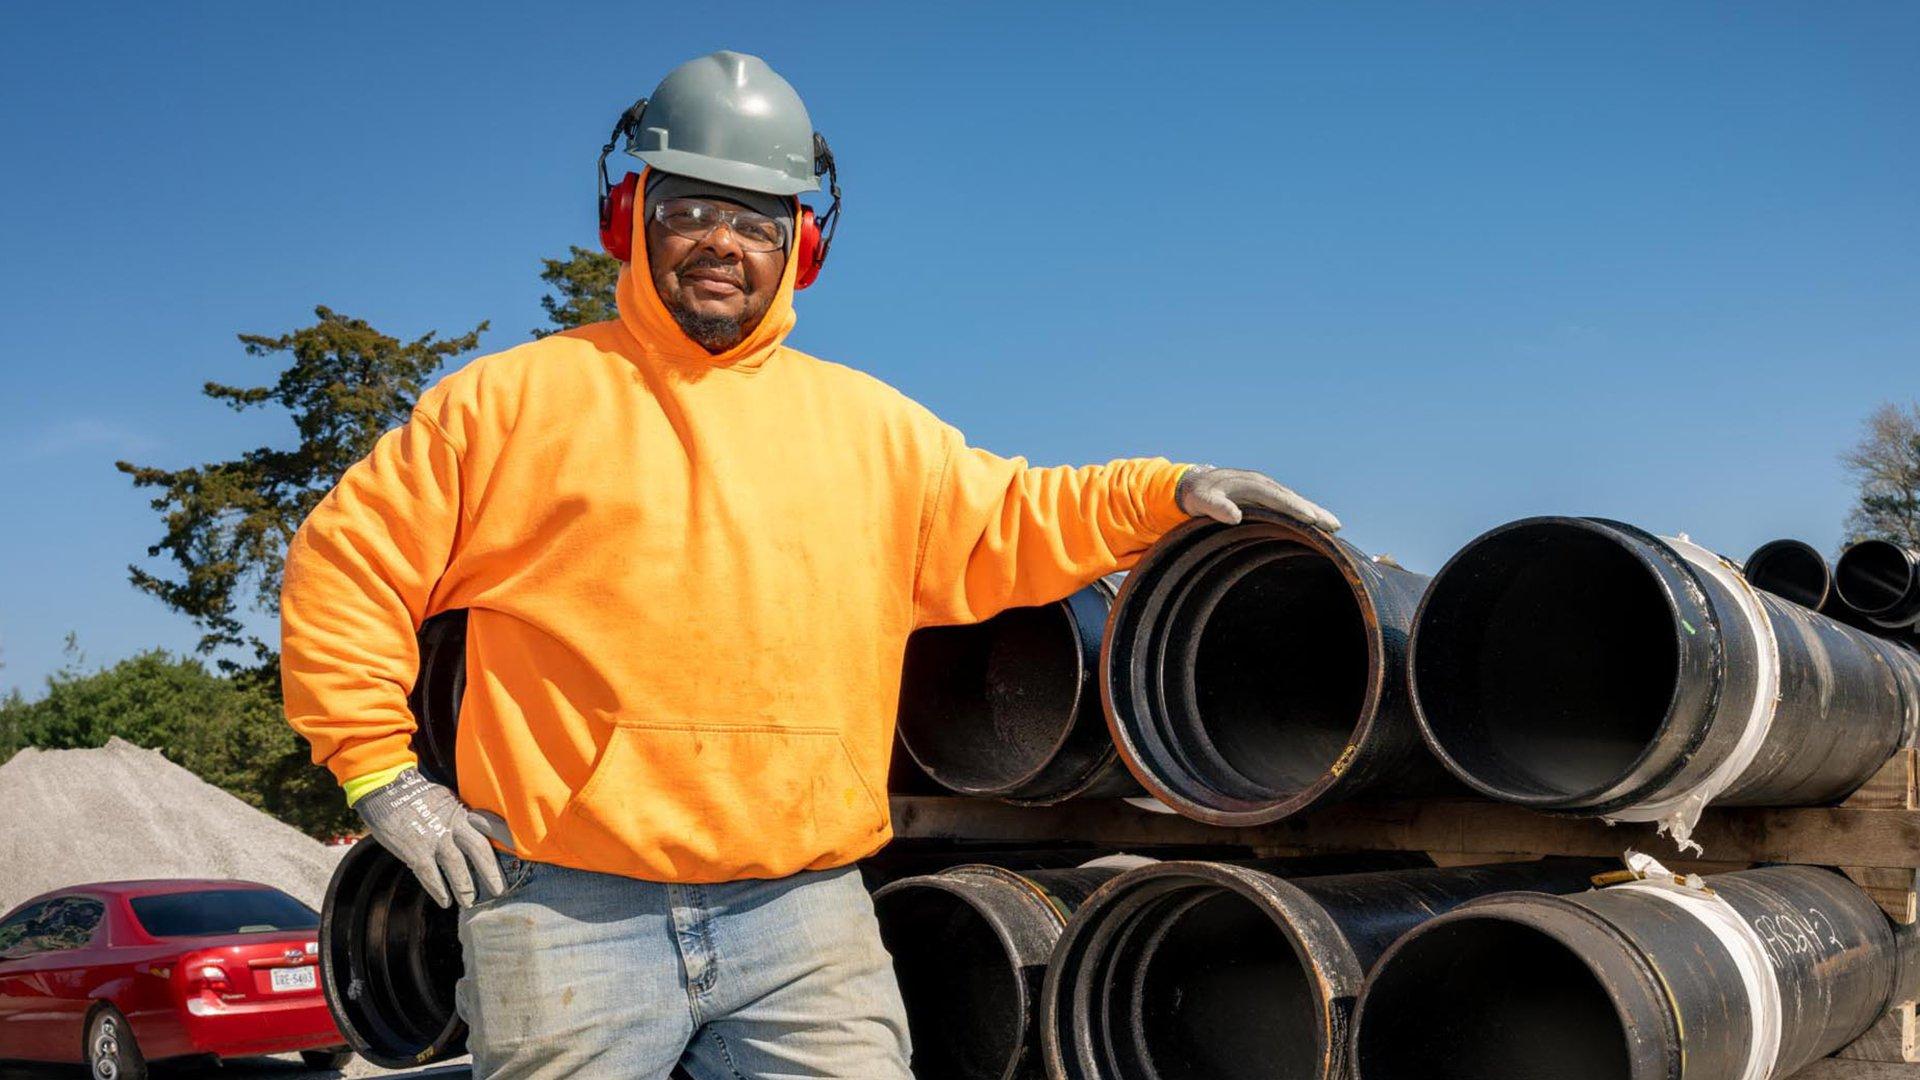 A contractor wearing a hard hat, ear protection and safety glasses stands next to a stack of pipe on a flatbed.